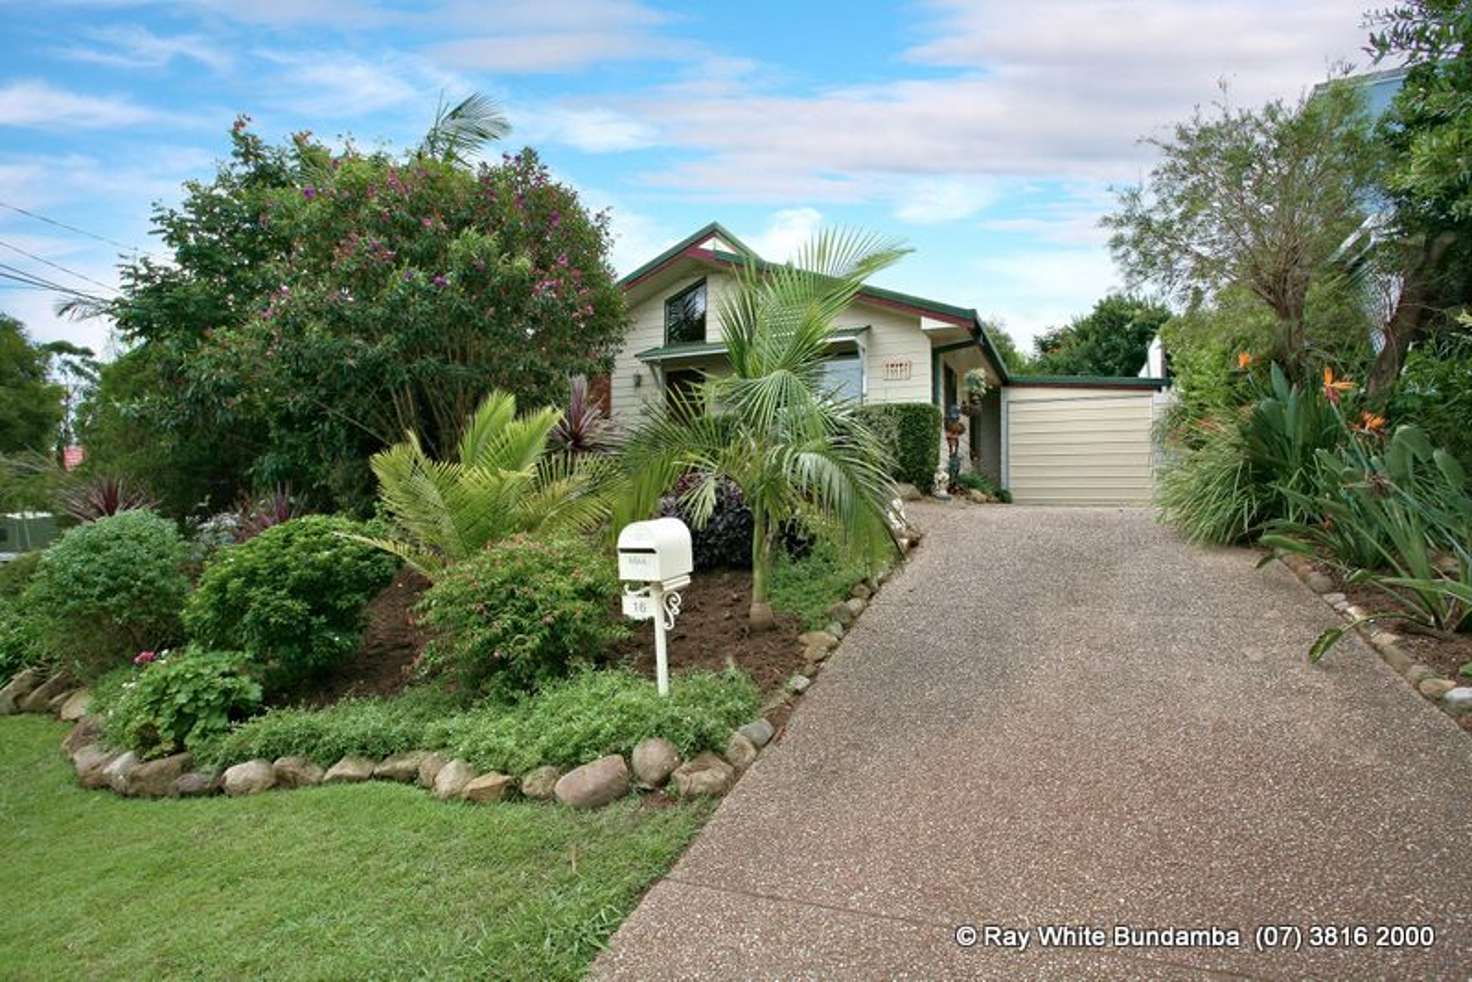 Main view of Homely house listing, 16 Portley, Bundamba QLD 4304